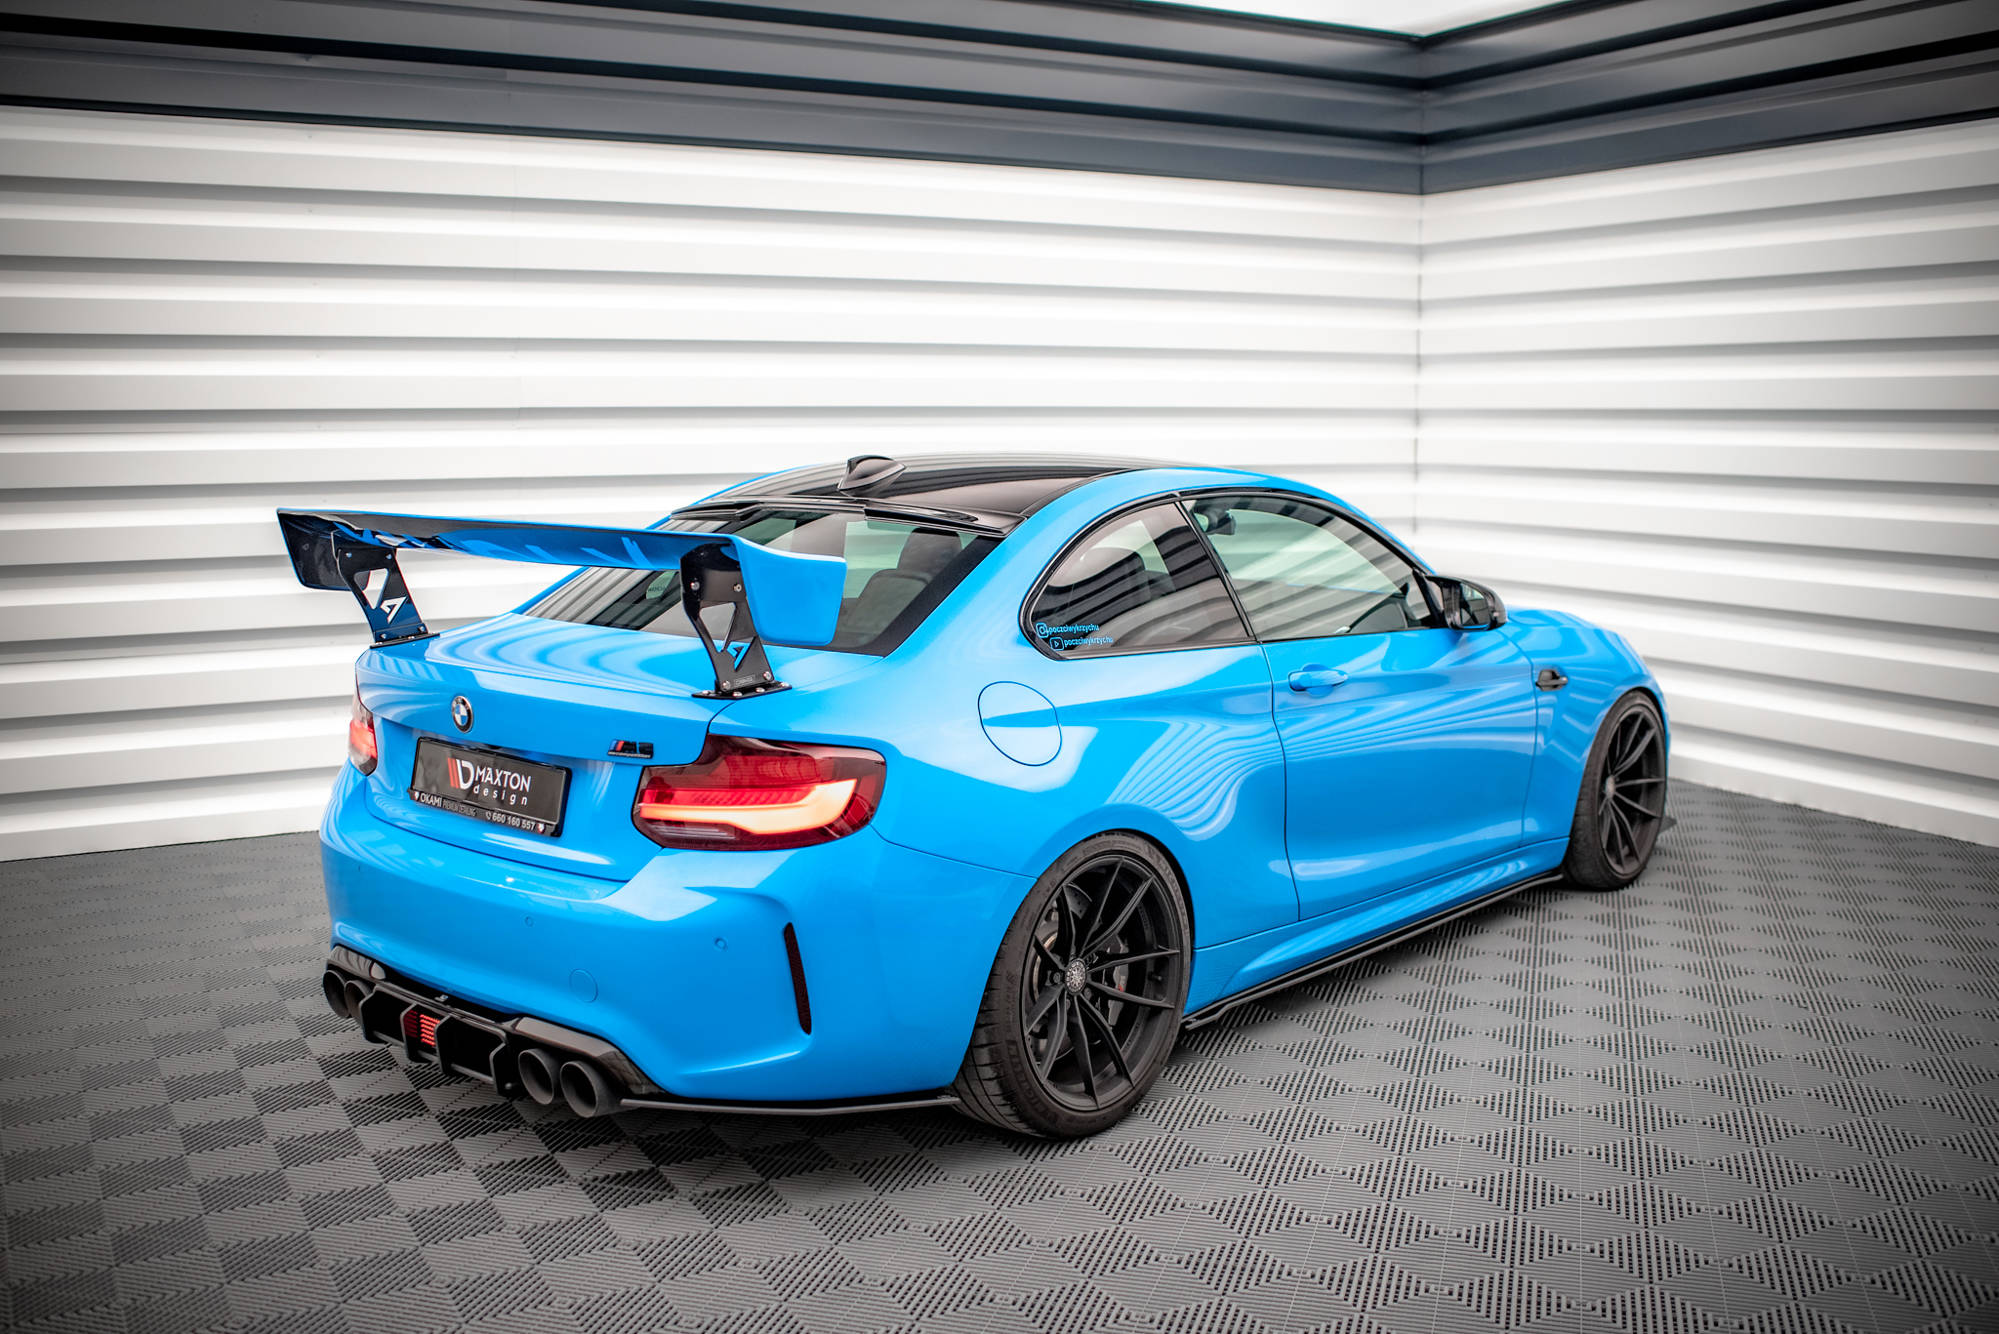 The extension of the rear window BMW M2 F87